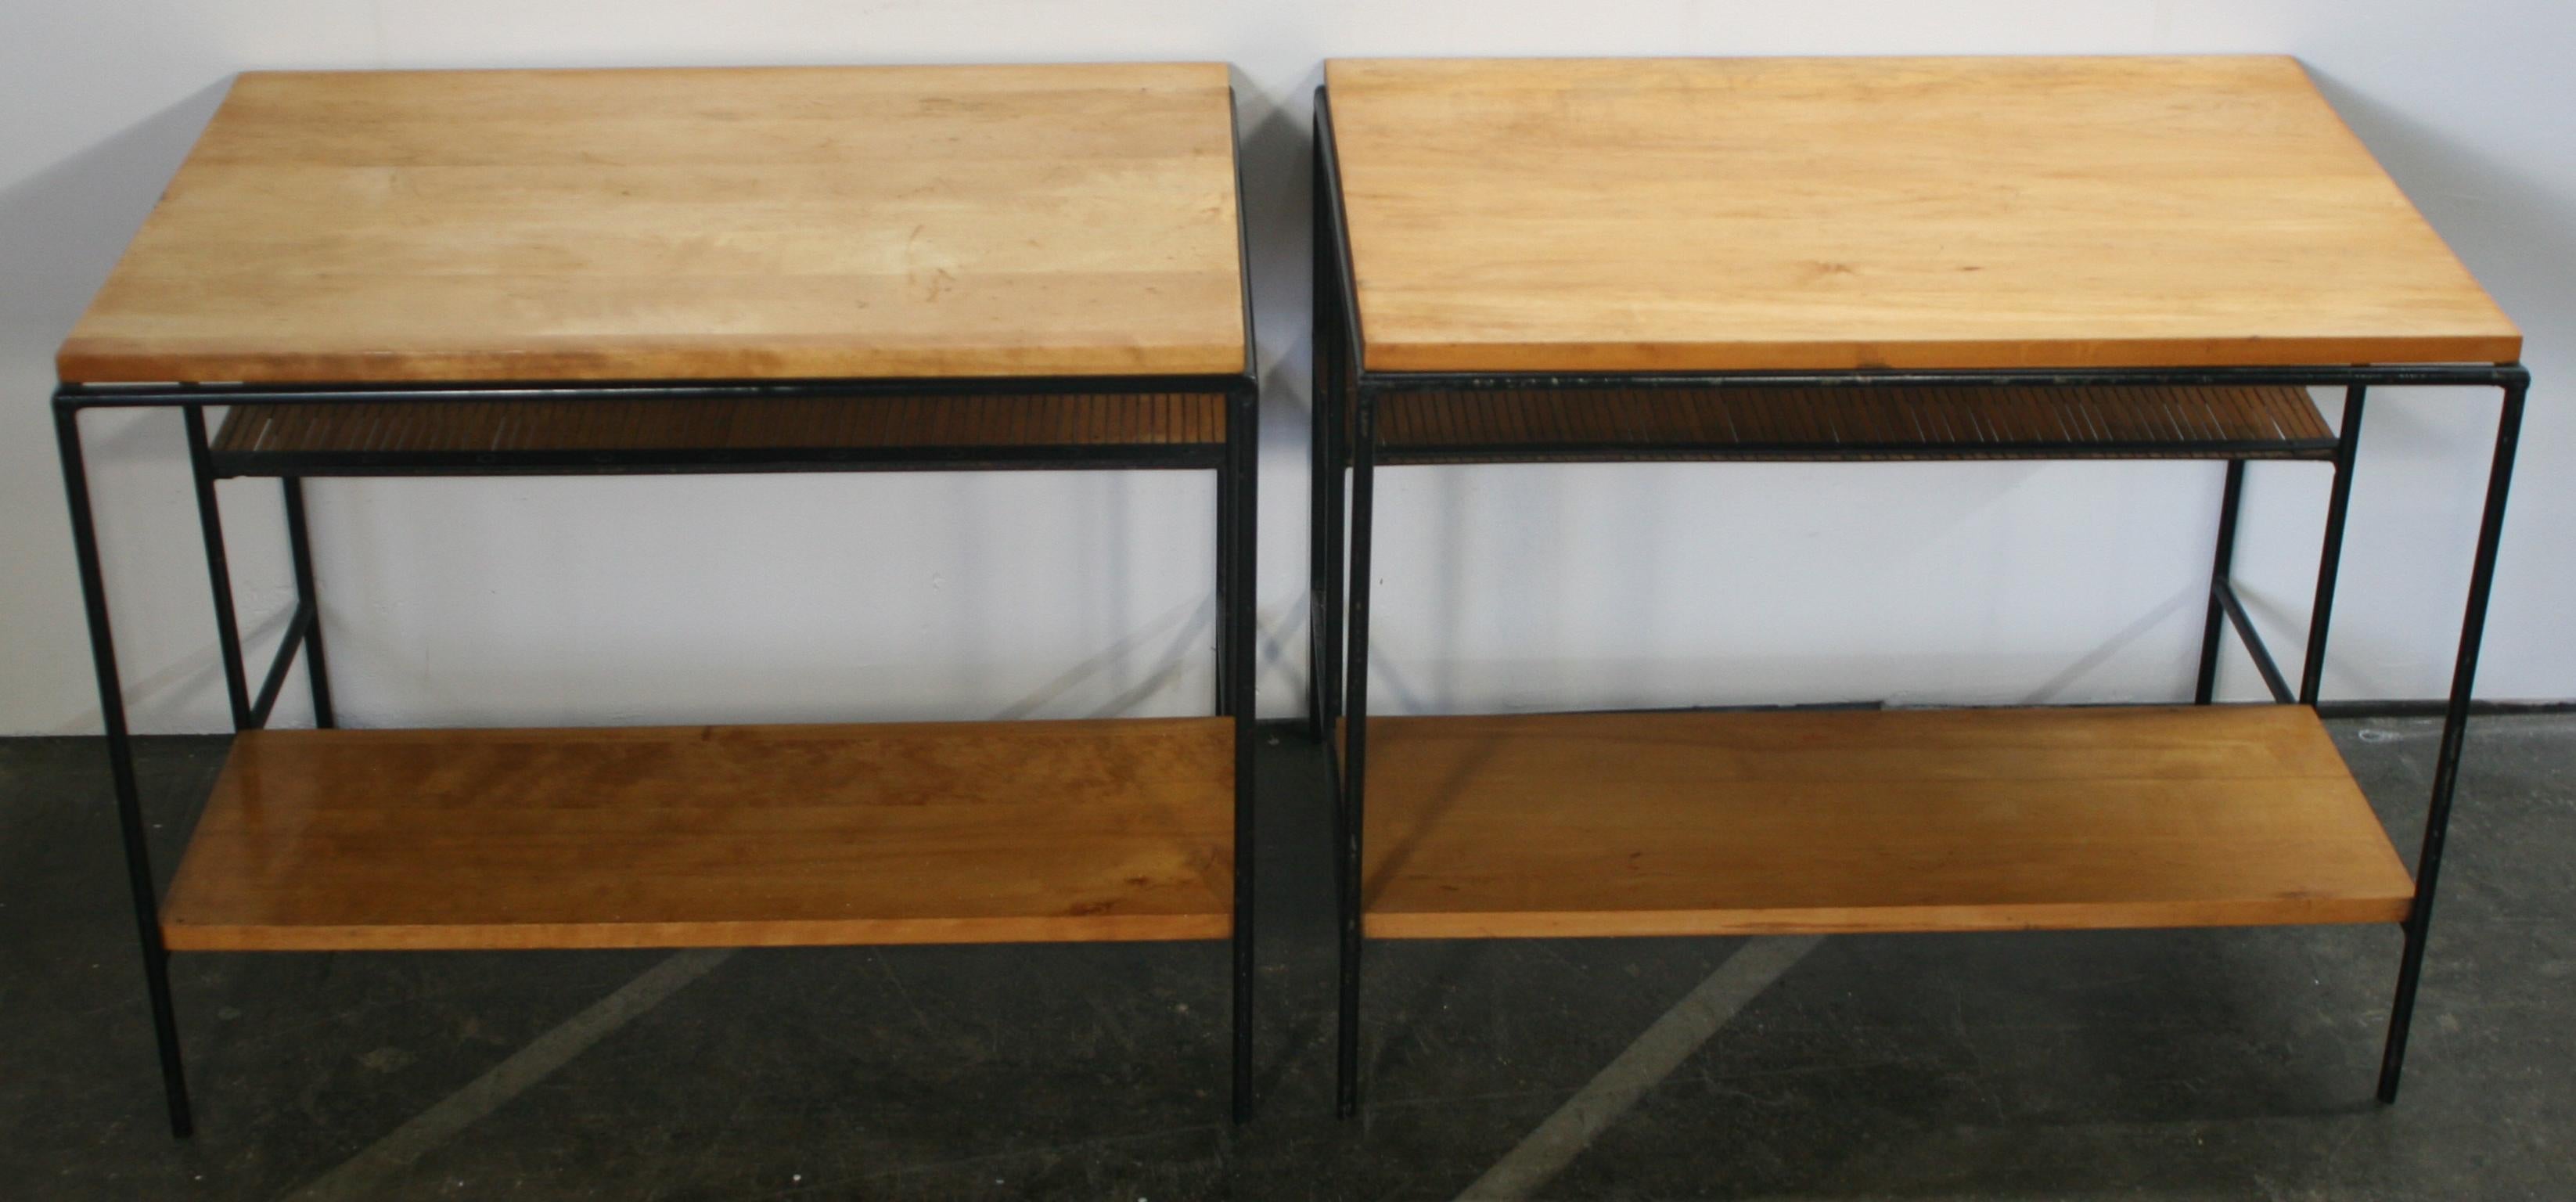 20th Century Midcentury Paul McCobb Pair of Planner Group End Side Tables #1578 Maple Iron